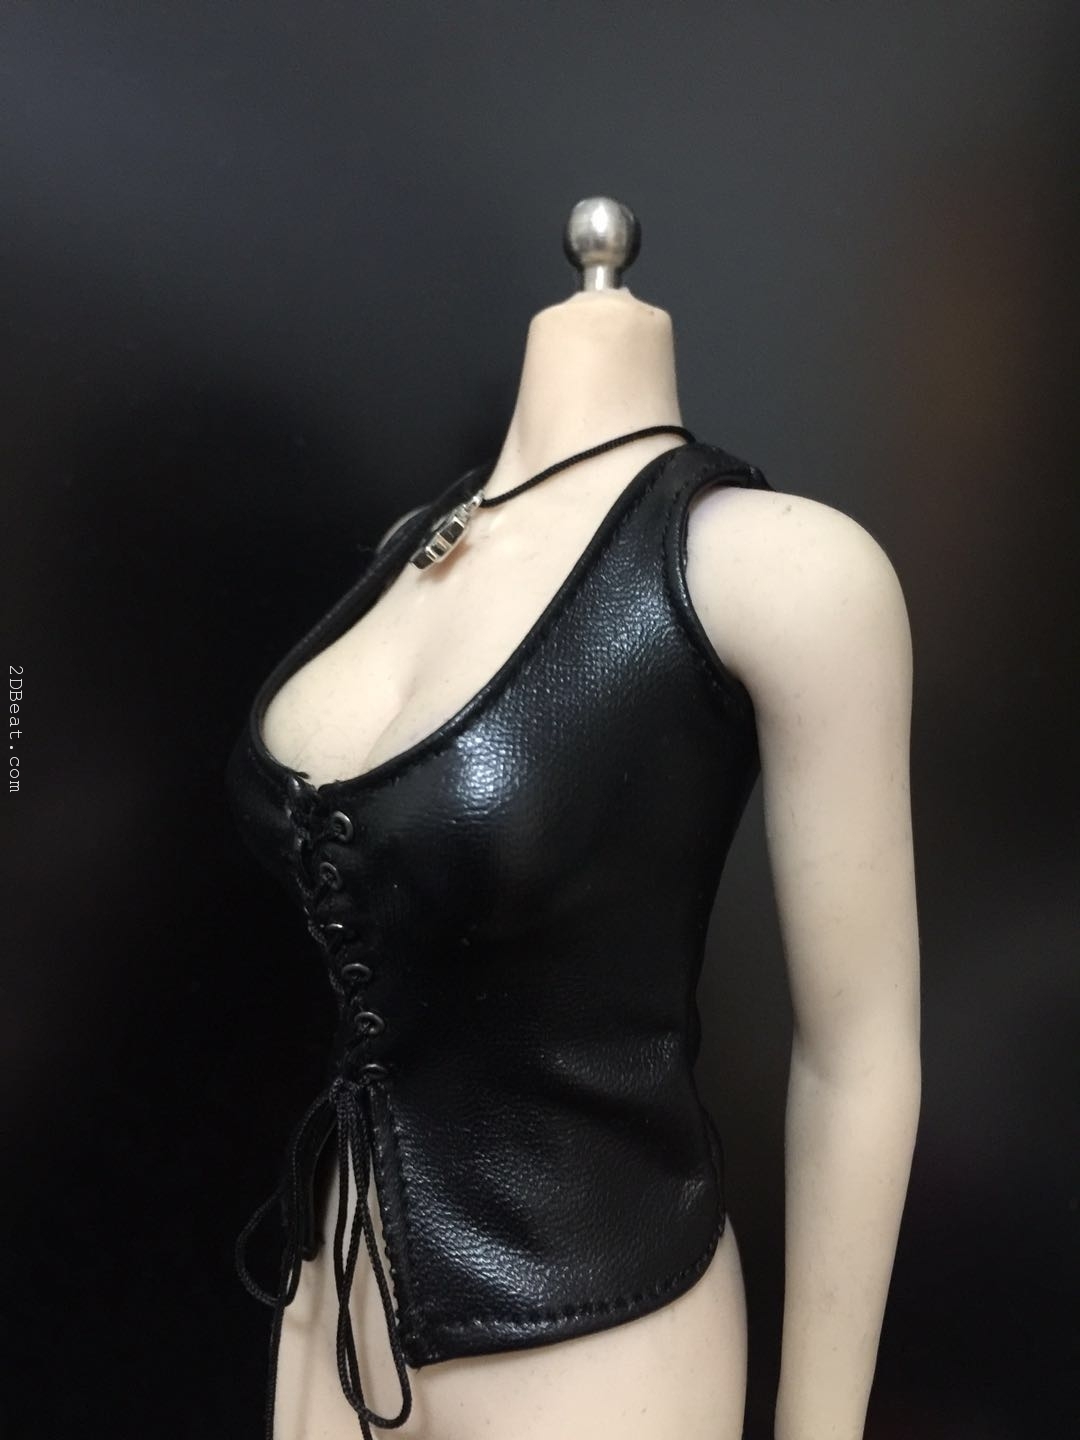 1/6 Scale Aya Brea Leather Vest – Parasite Eve The 3rd Birthday – 2DBeat  Hobby Store